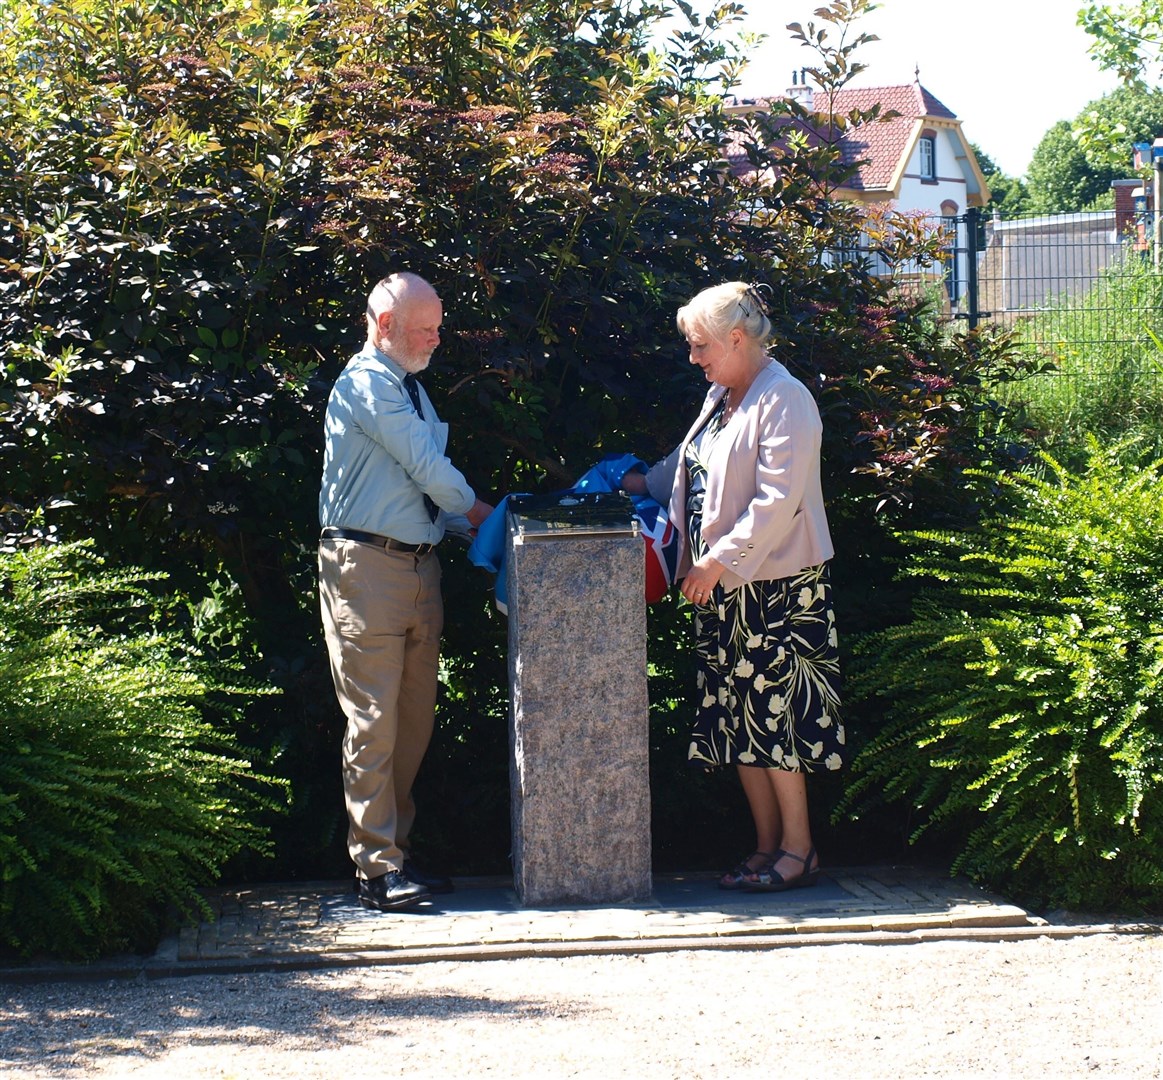 Unveiling the memorial to the Lancaster crew.